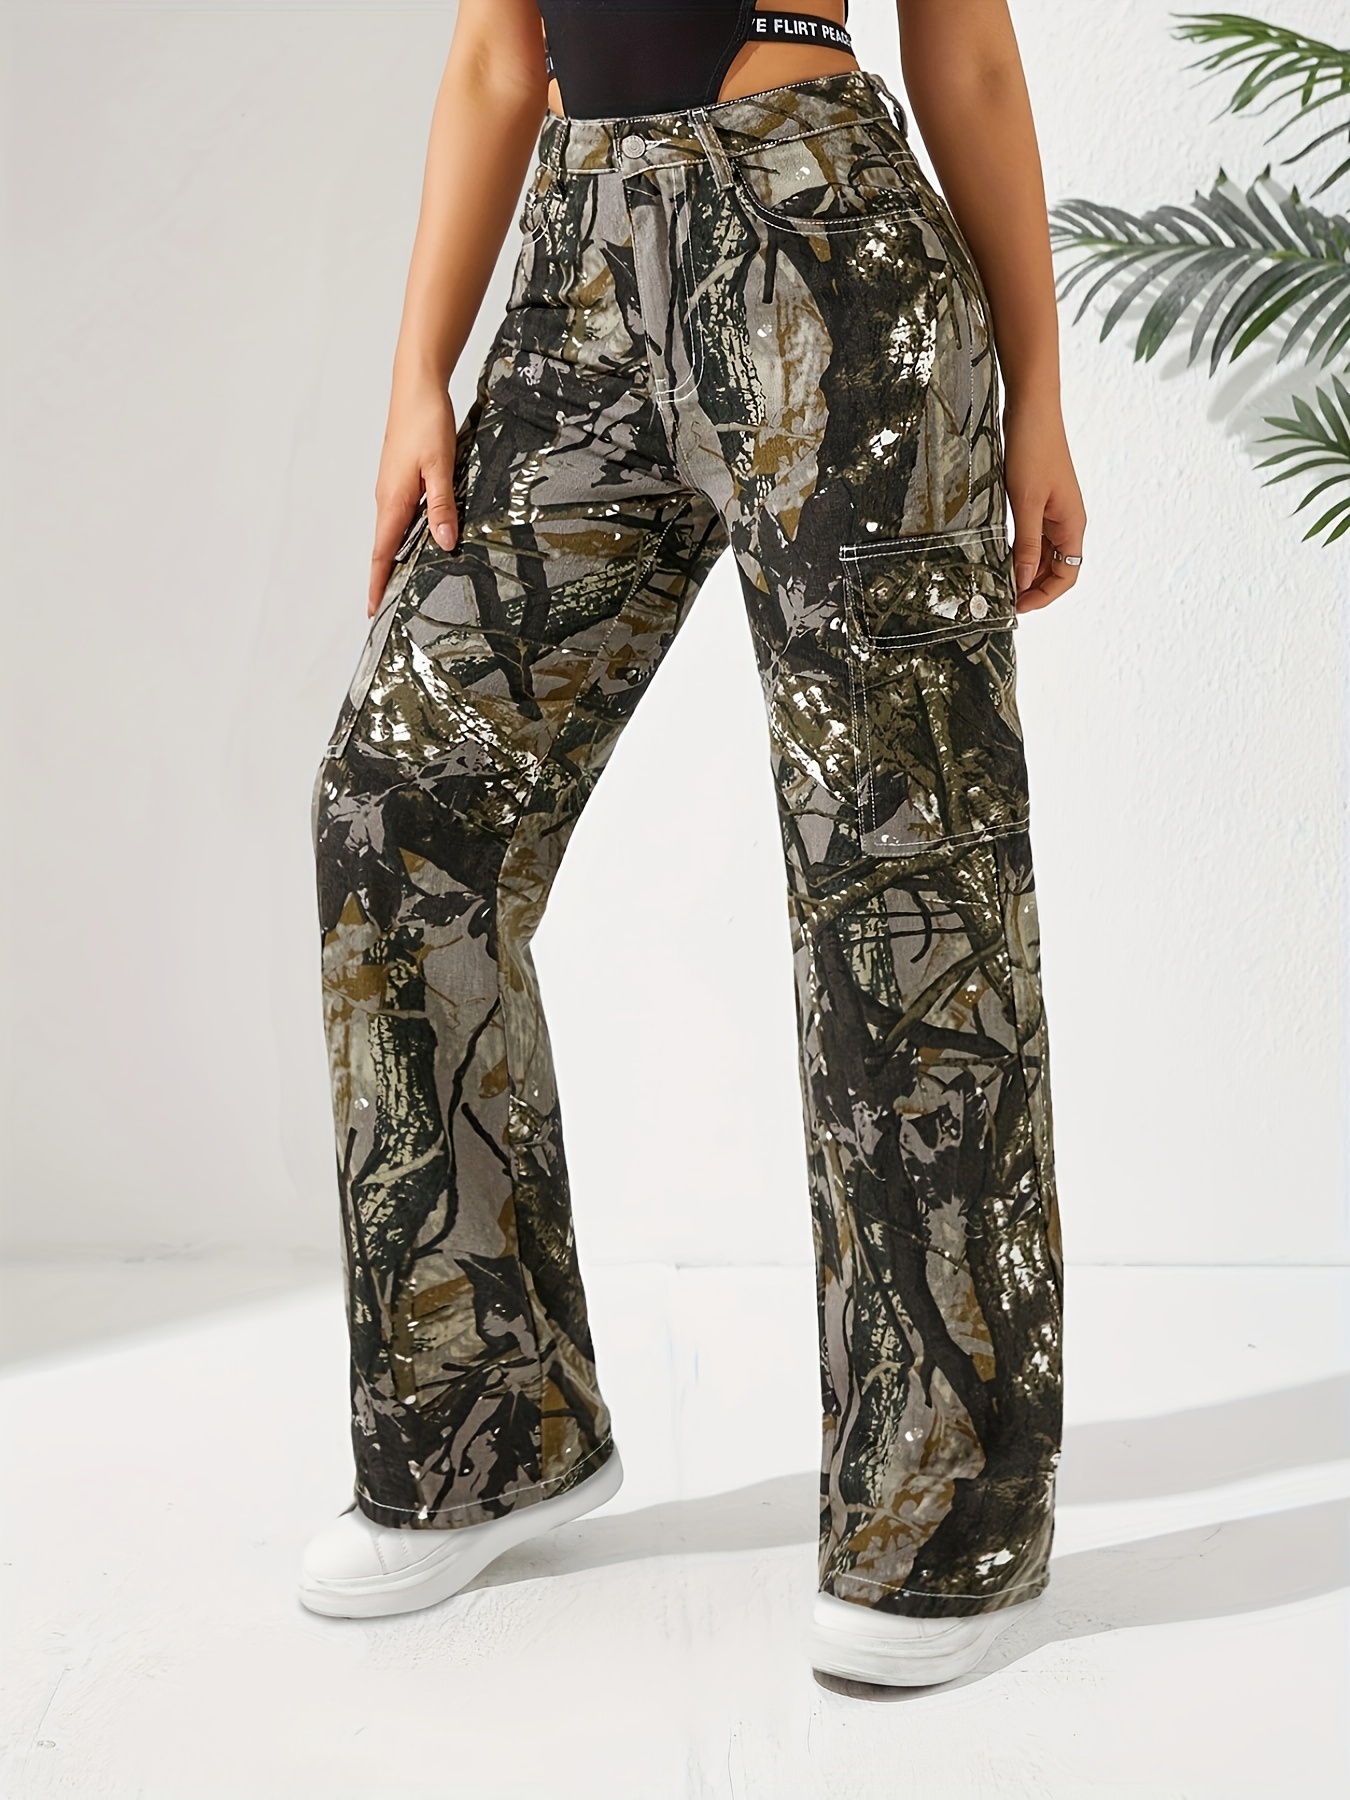 Camo Print Women Army Pants With Side Pocket And Zipper Closure